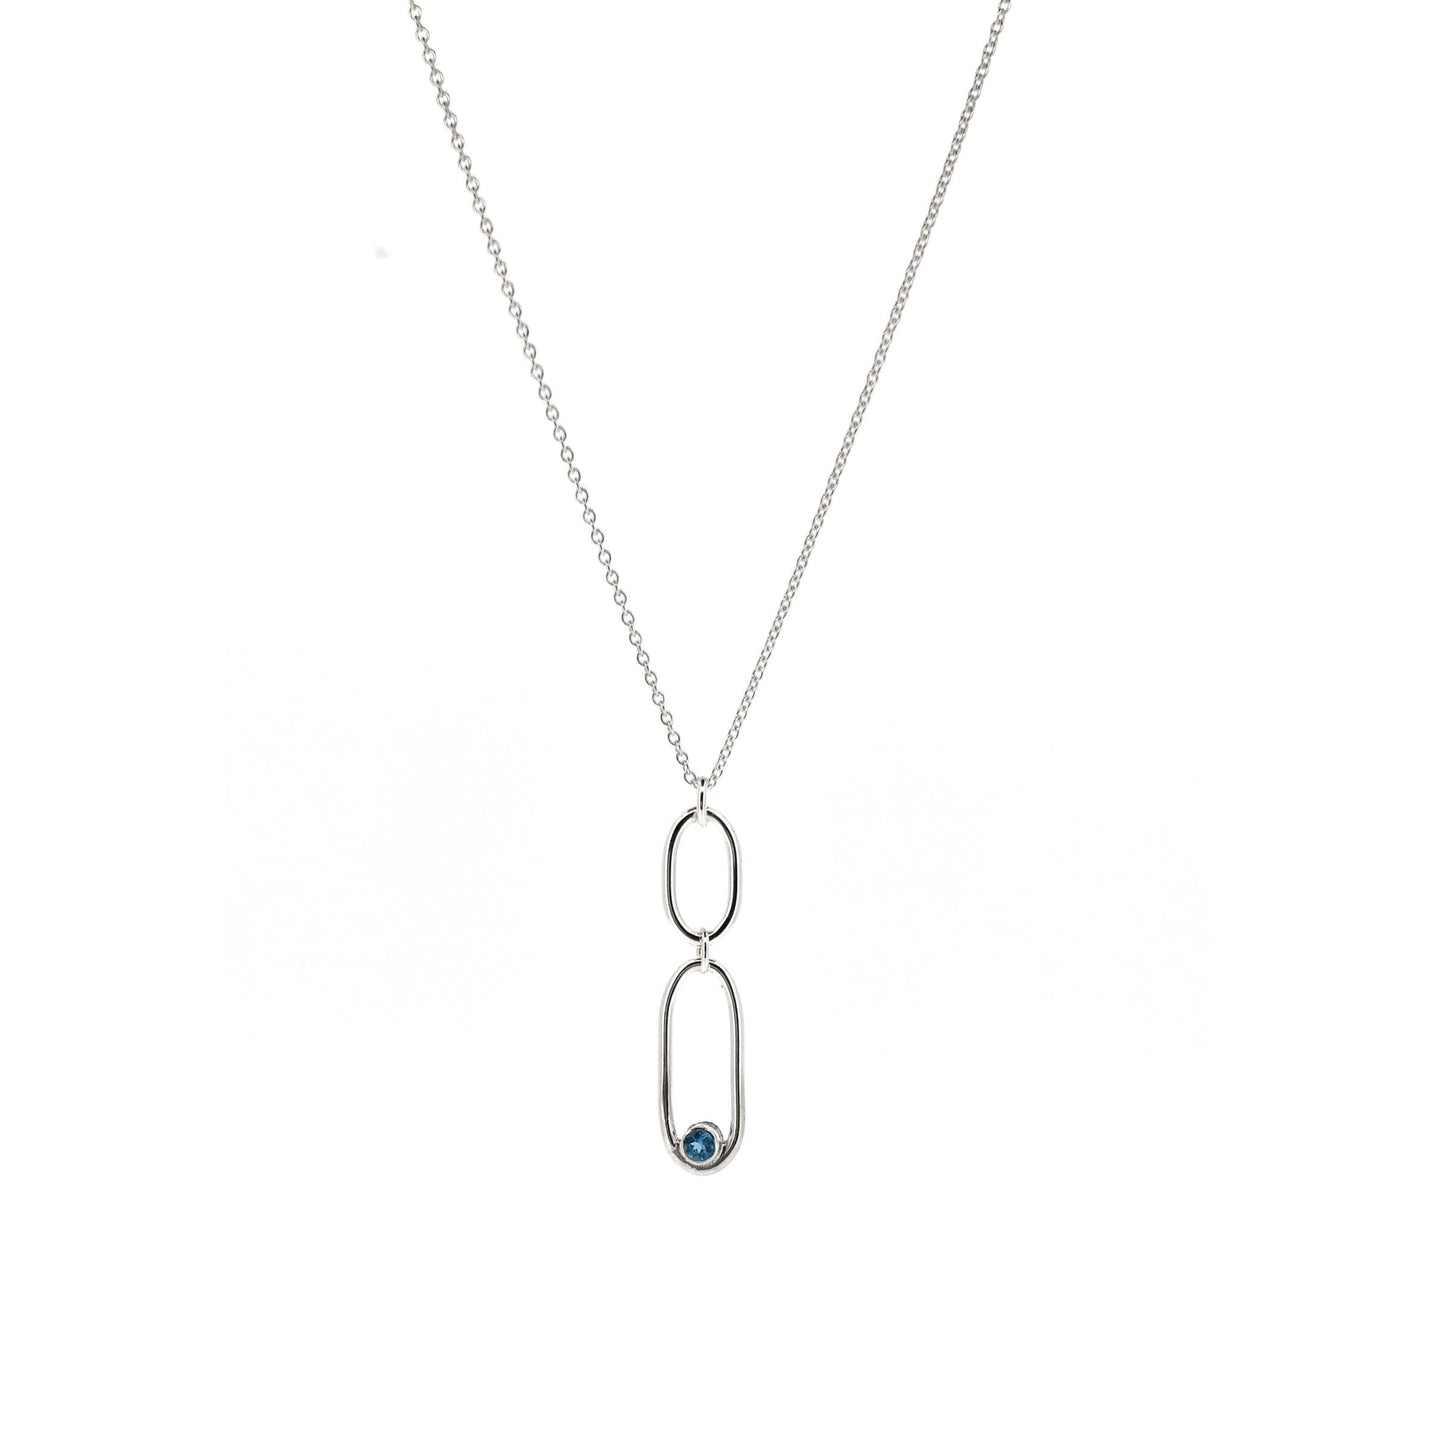 A silver pendant featuring 2 open oblong shaped of different sizes with a blue topaz gemstone set inside one curve. On a silver chain.